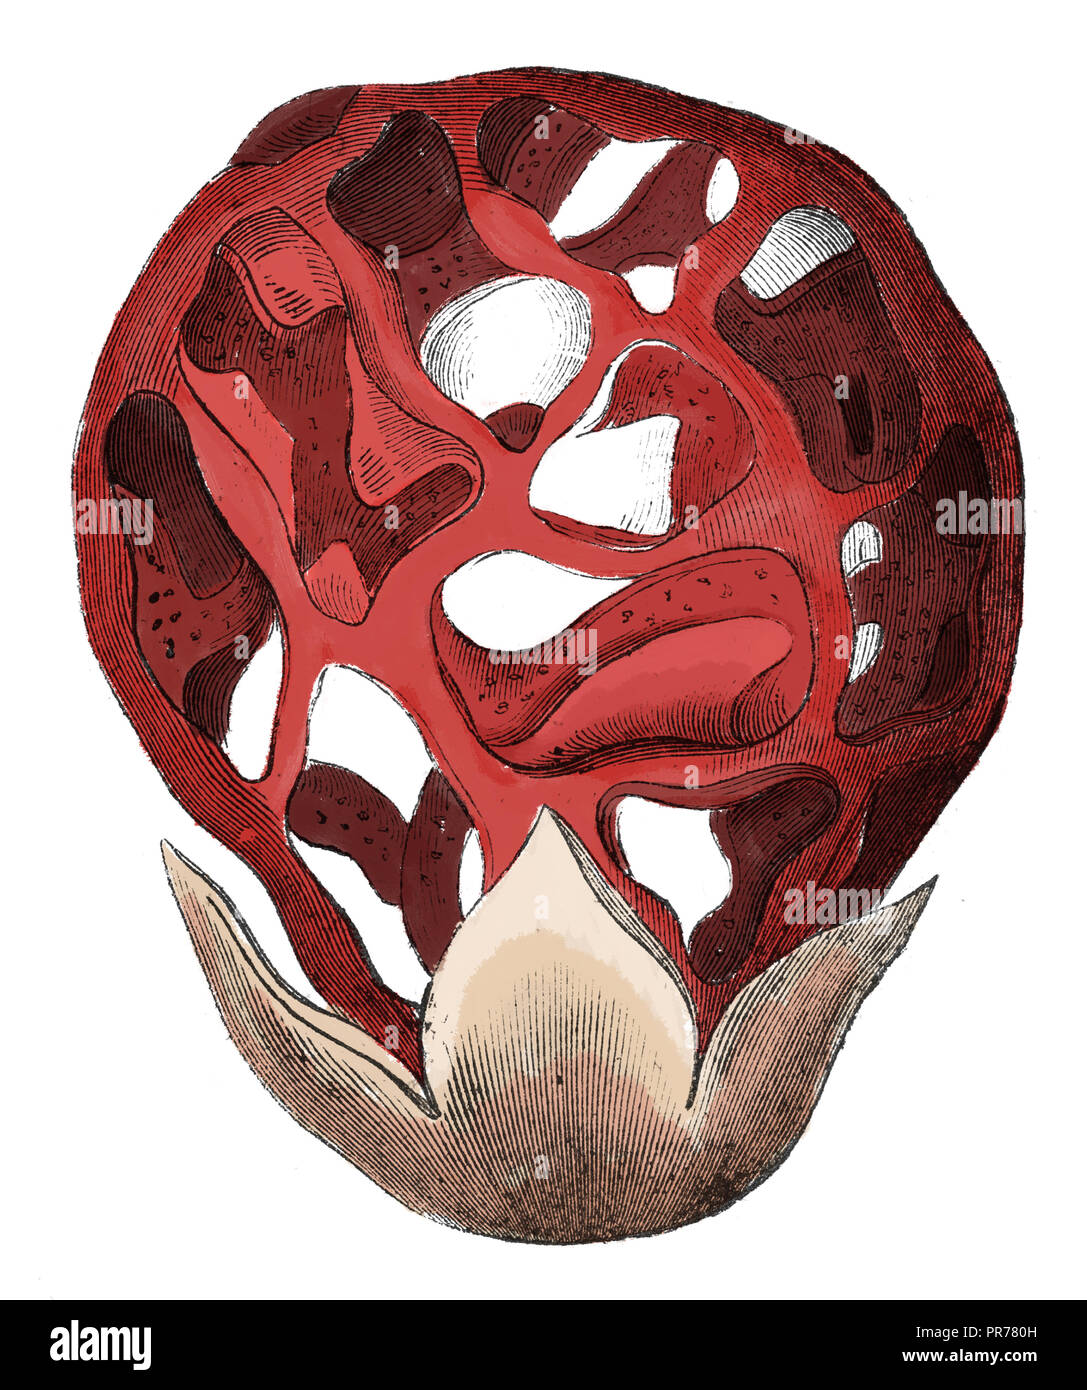 19th century illustration of Clathrus ruber, known as the latticed stinkhorn, the basket stinkhorn or the red cage. Published in Systematischer Bilder Stock Photo